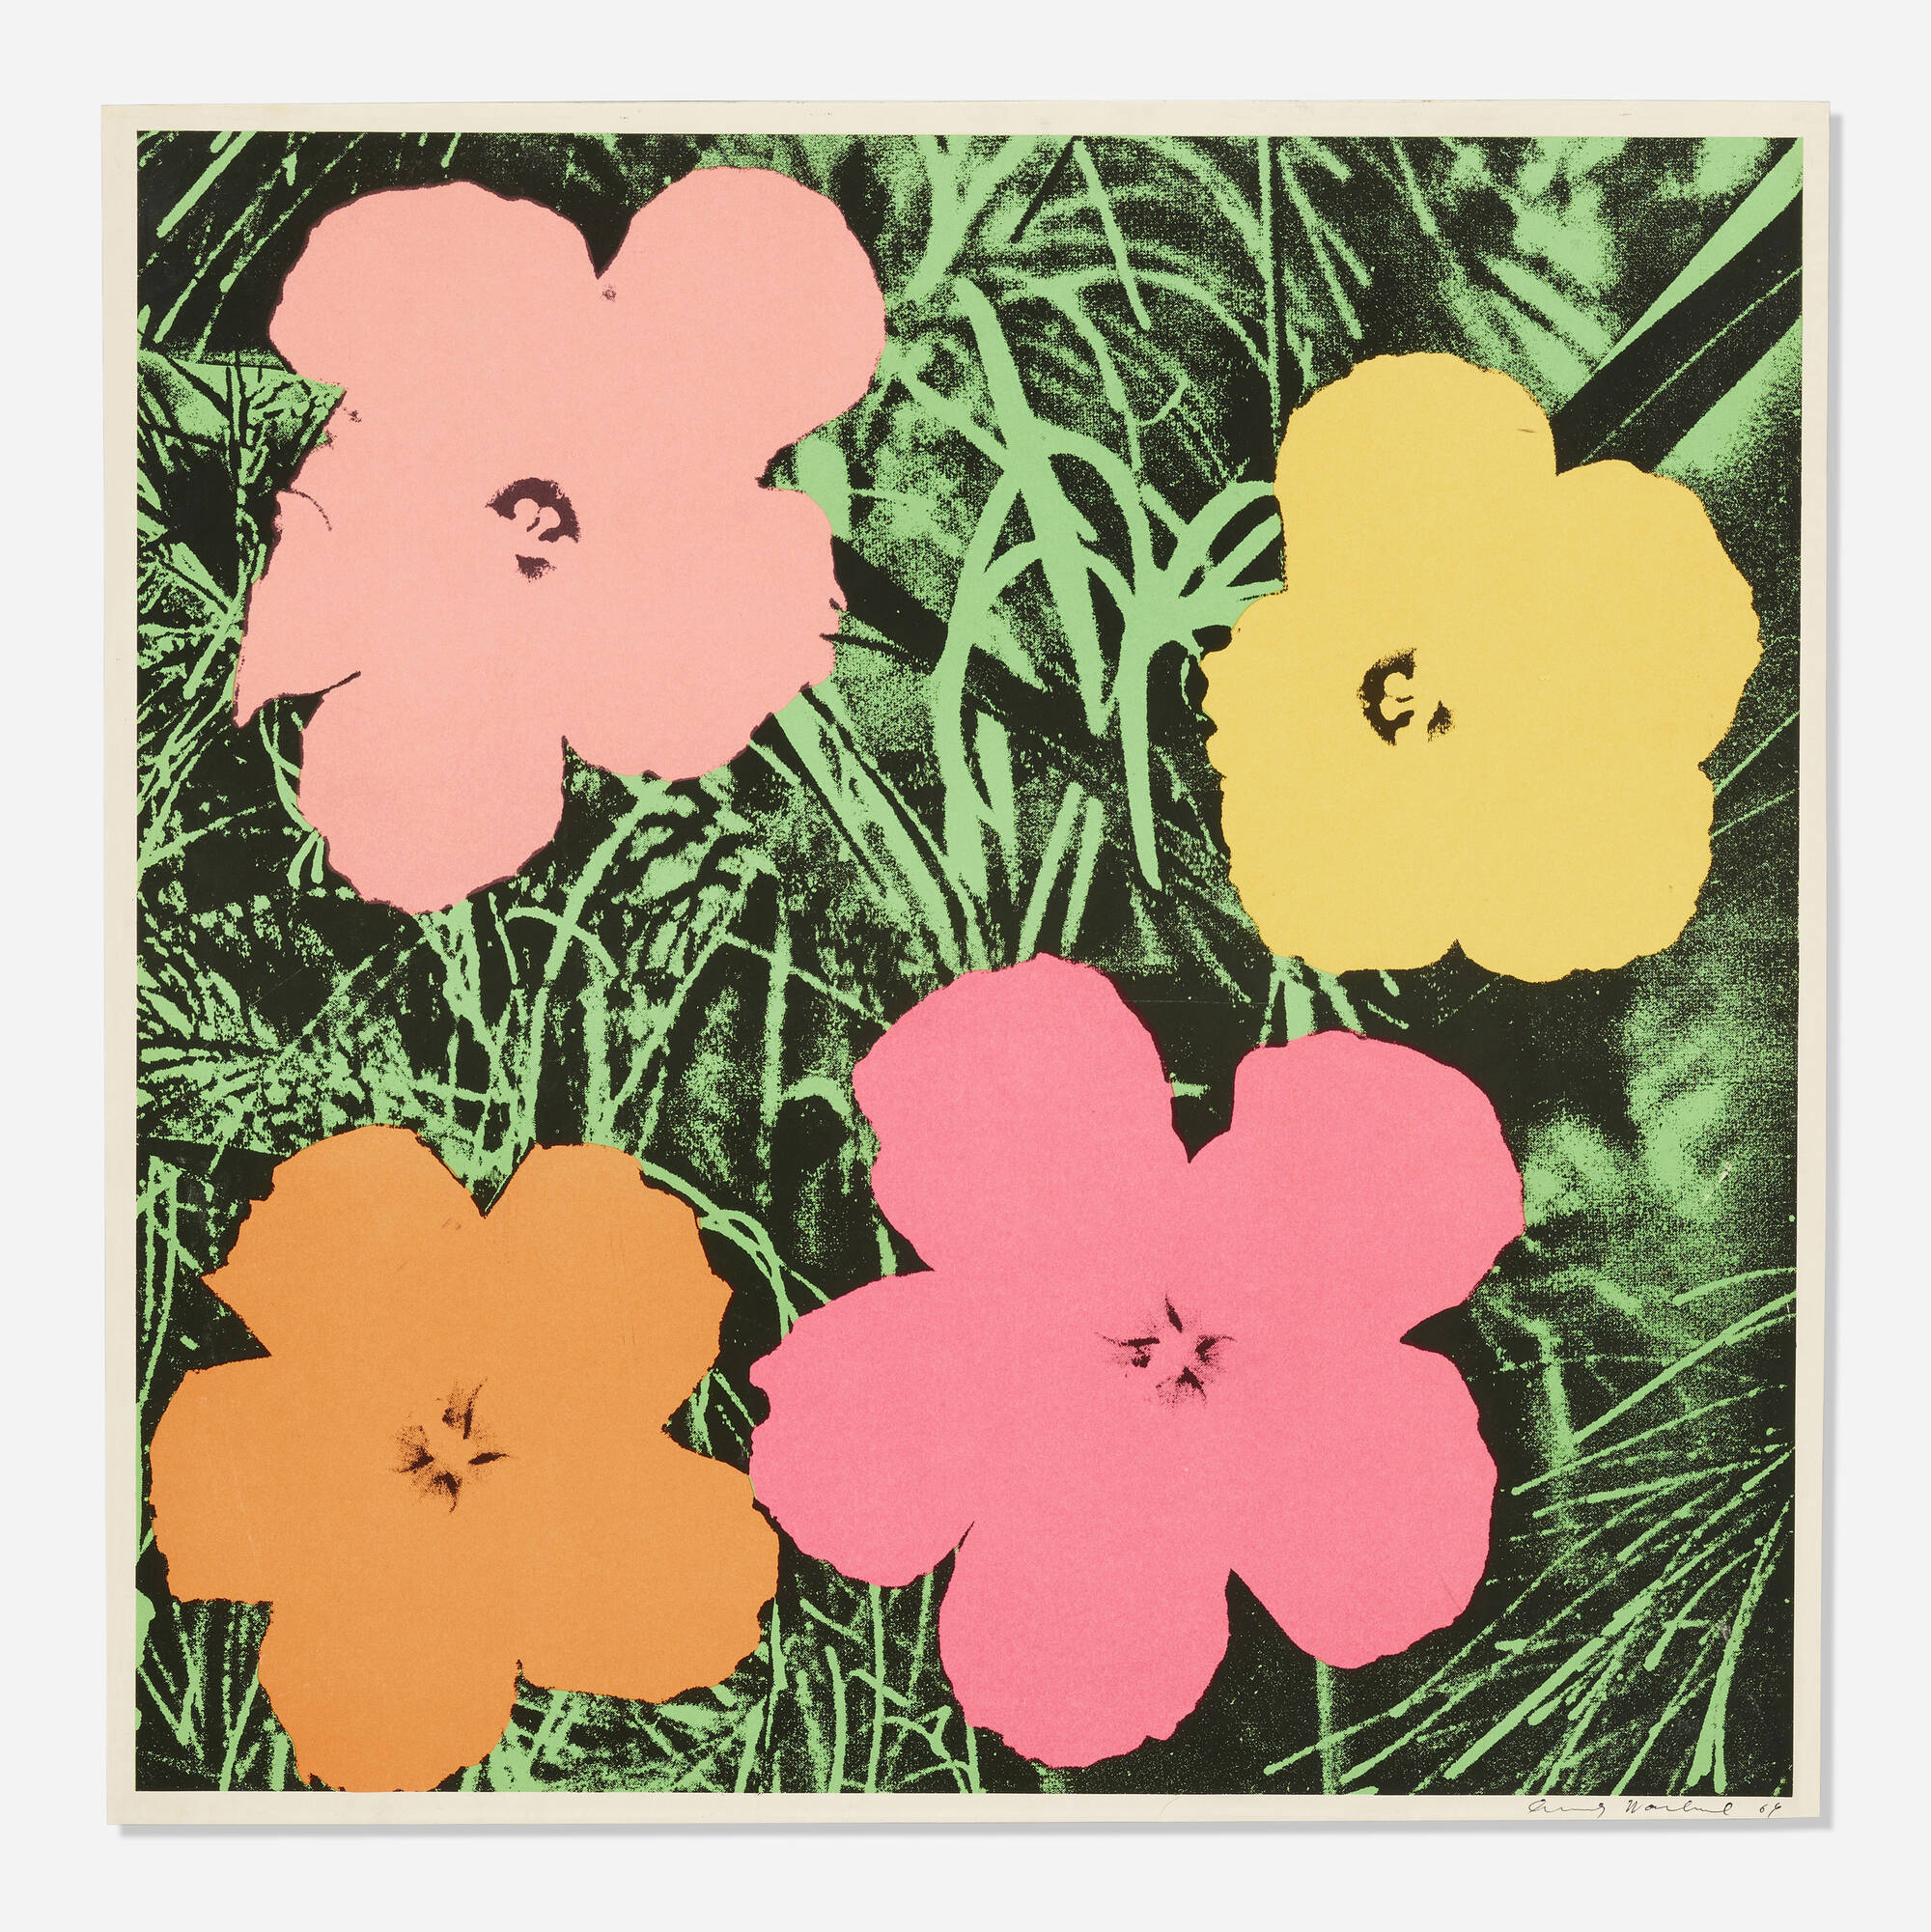 150 Andy Warhol Flowers Prints Multiples 24 February 22 Auctions Rago Auctions